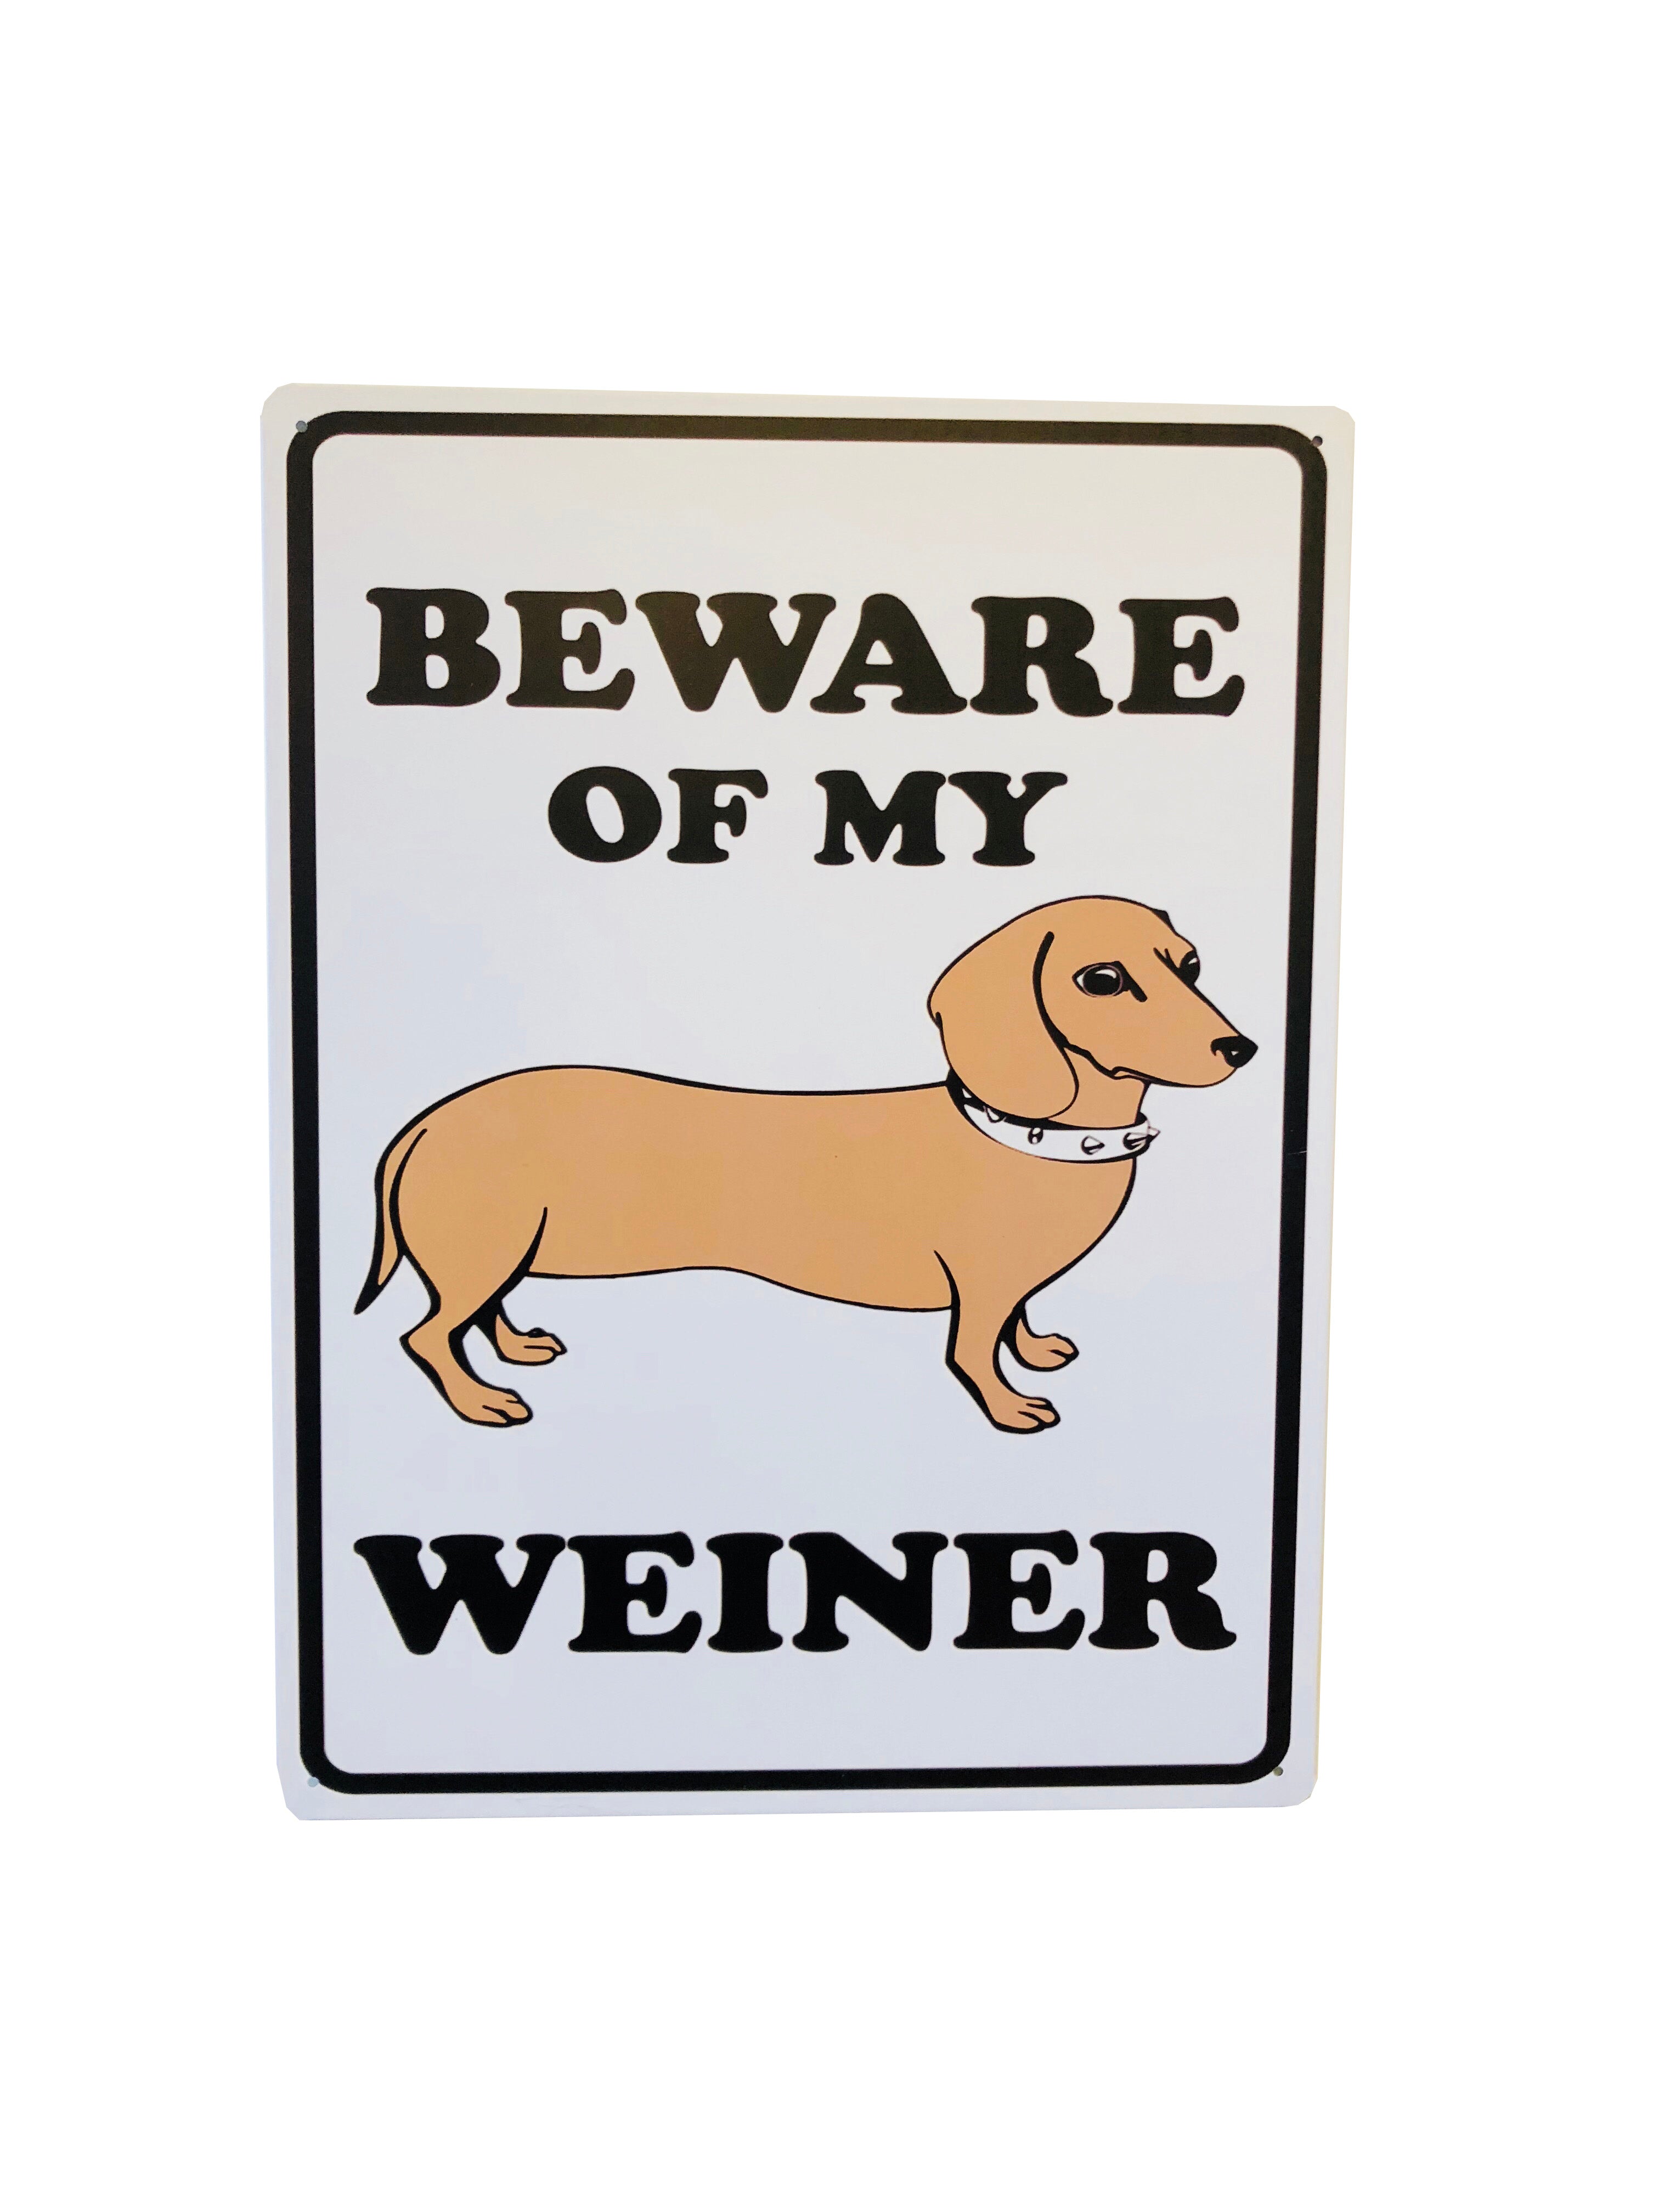 WARNING Beware of My Weiner Tin Poster PPPI 